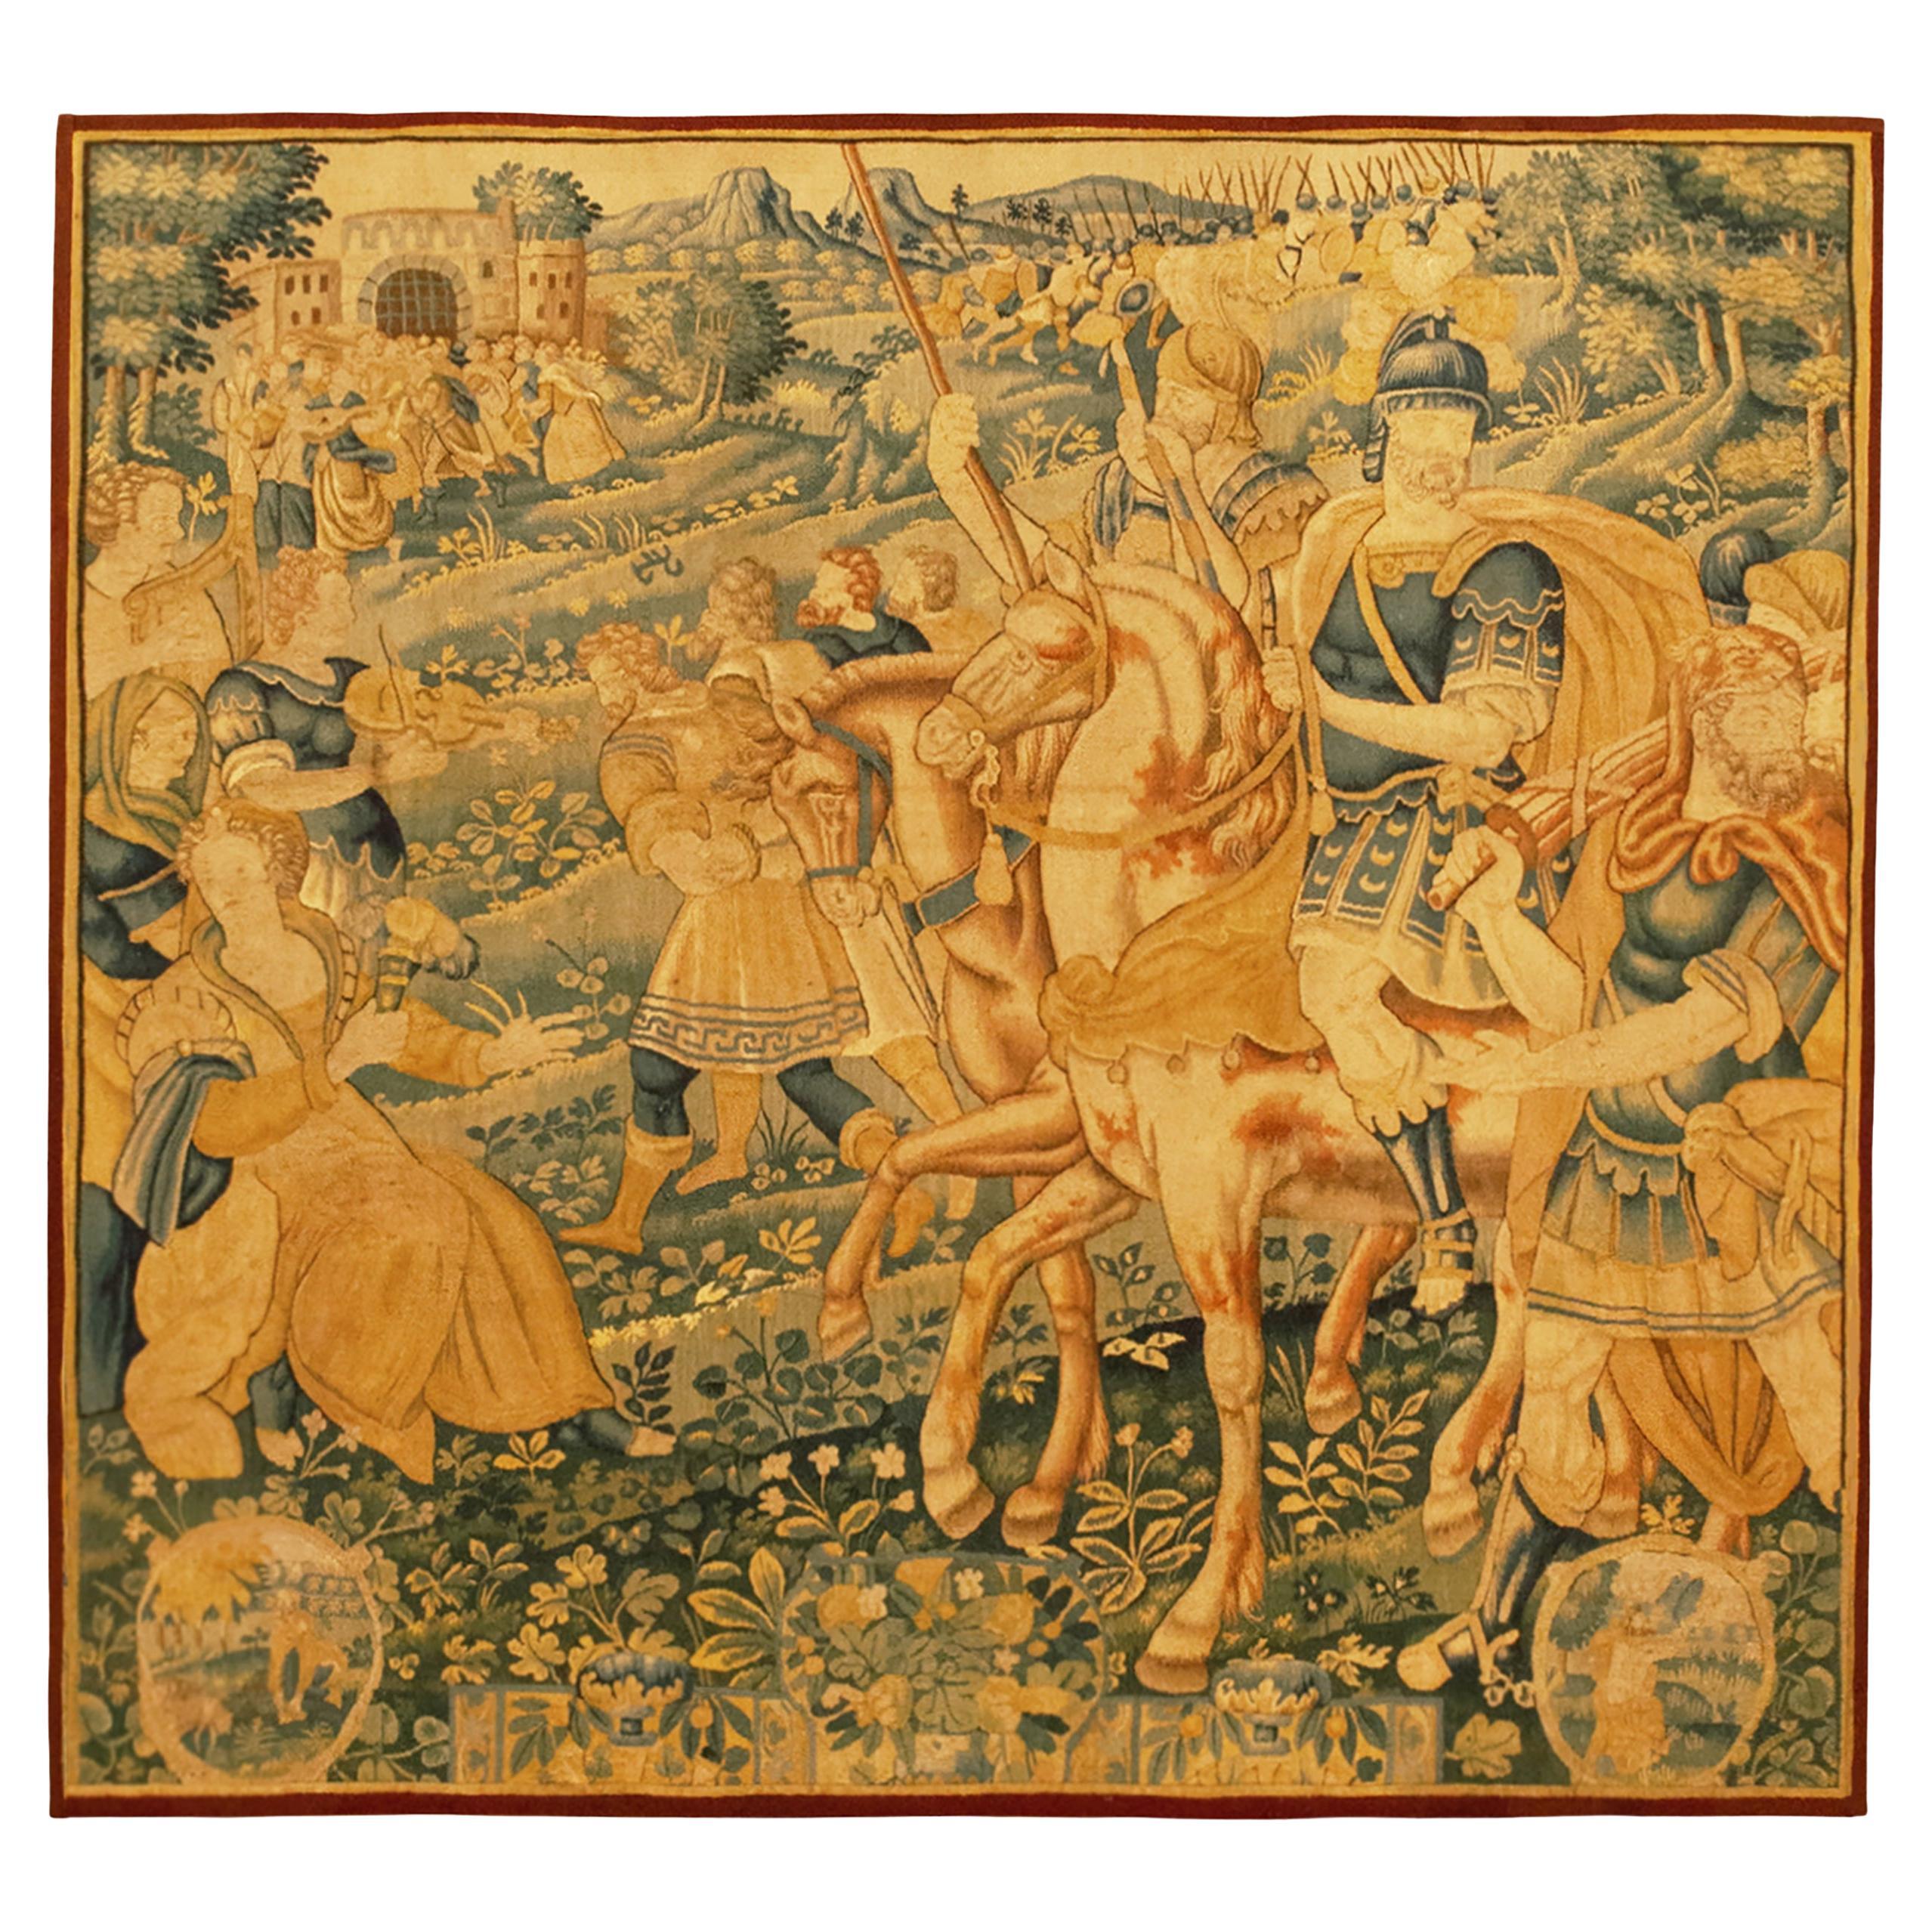 17th Century Flemish Historical Tapestry with the Roman General Coriolanus